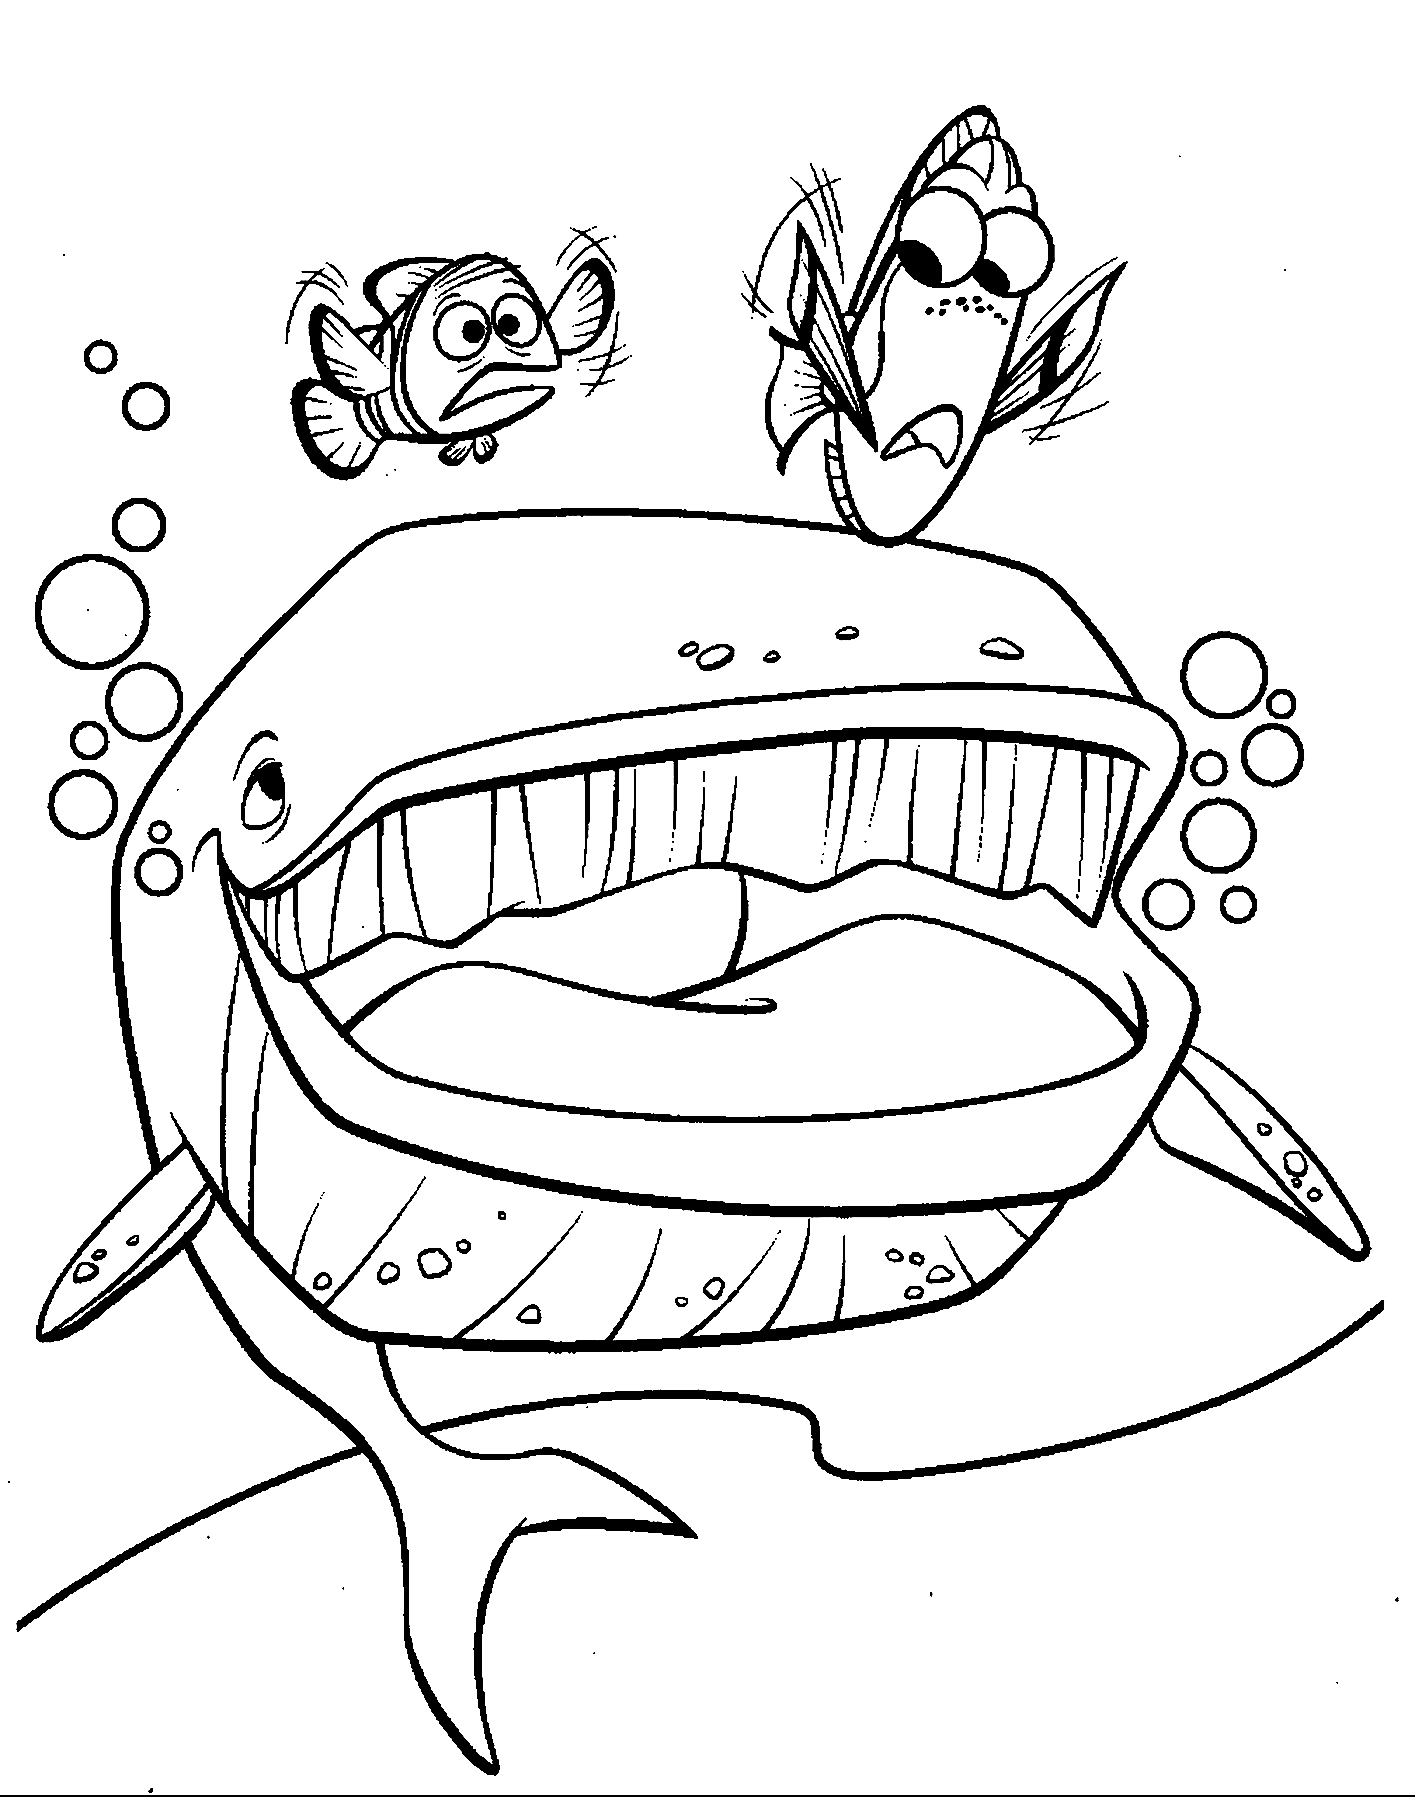 Dory's Friendly Whale and Marlin Clownfish Coloring Page